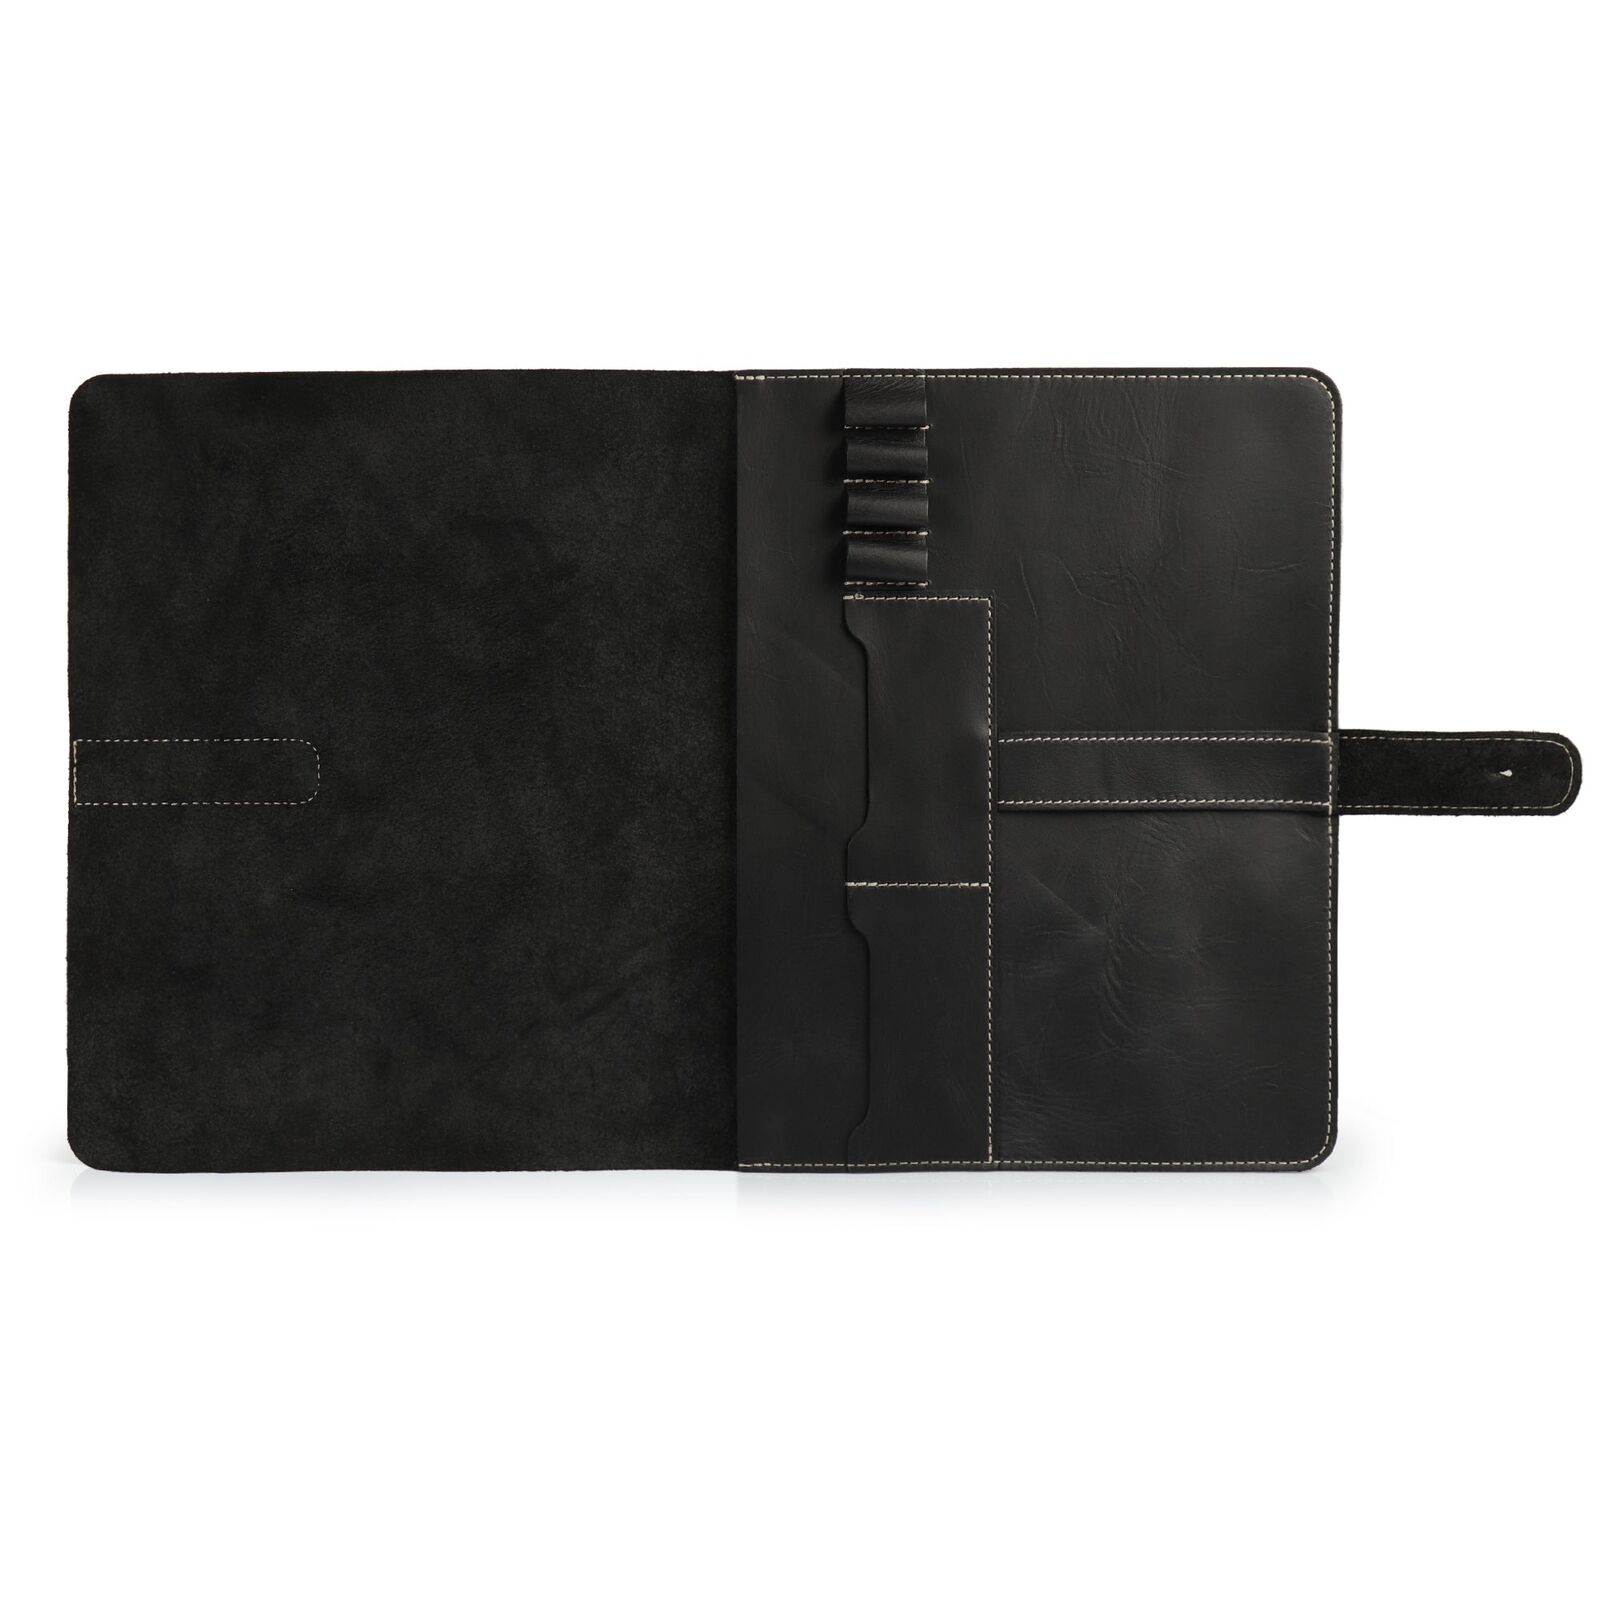 Genuine Leather Tablet Cover with Two Card Slots & Leather Pen / Pencil Holders